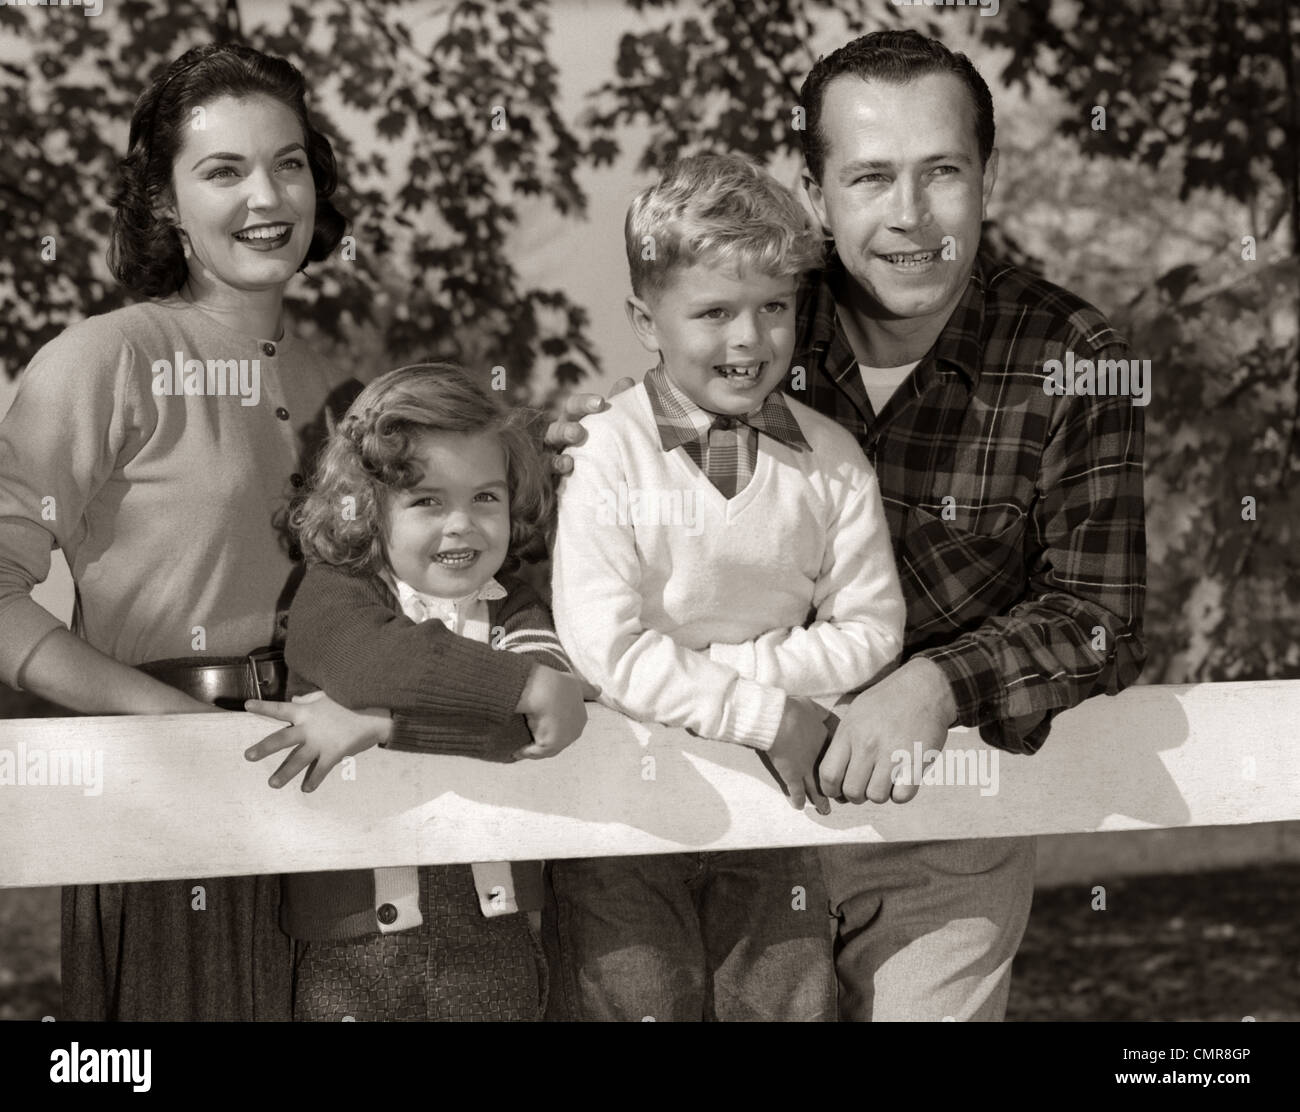 1950s FAMILY OUTSIDE SMILING MOTHER FATHER SON DAUGHTER Stock Photo